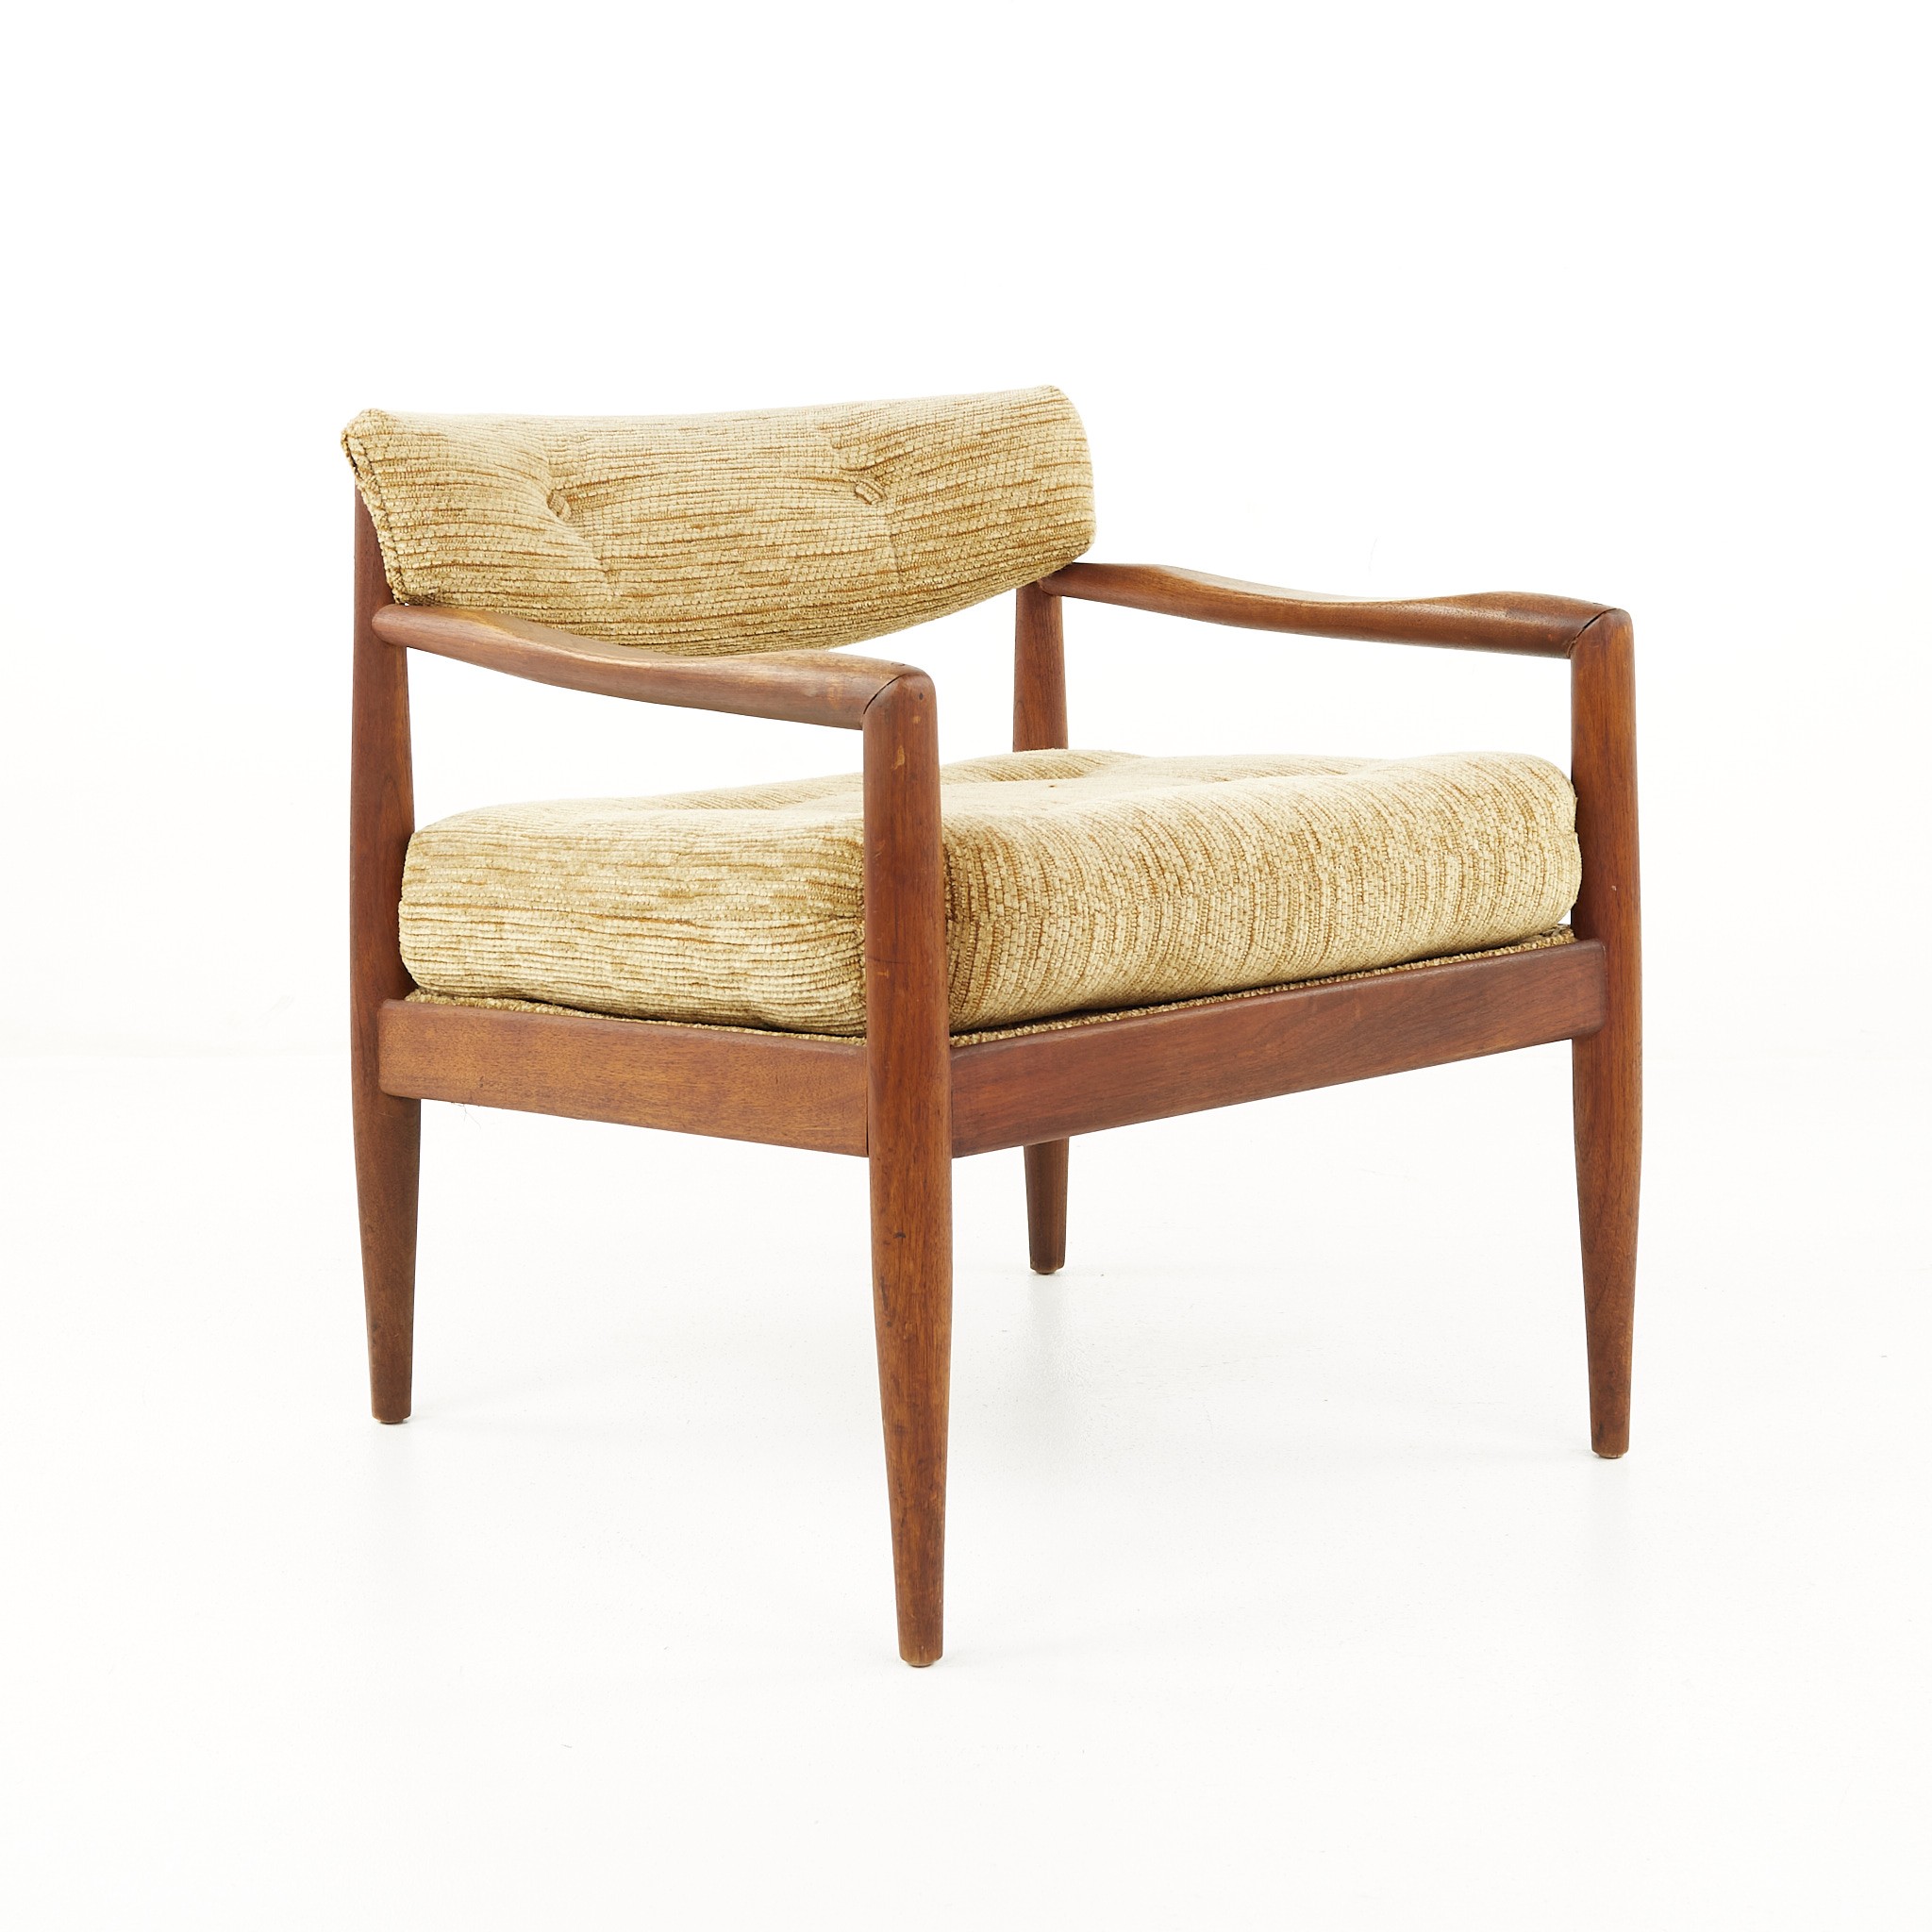 Adrian Pearsall for Craft Associates Lounge Chair